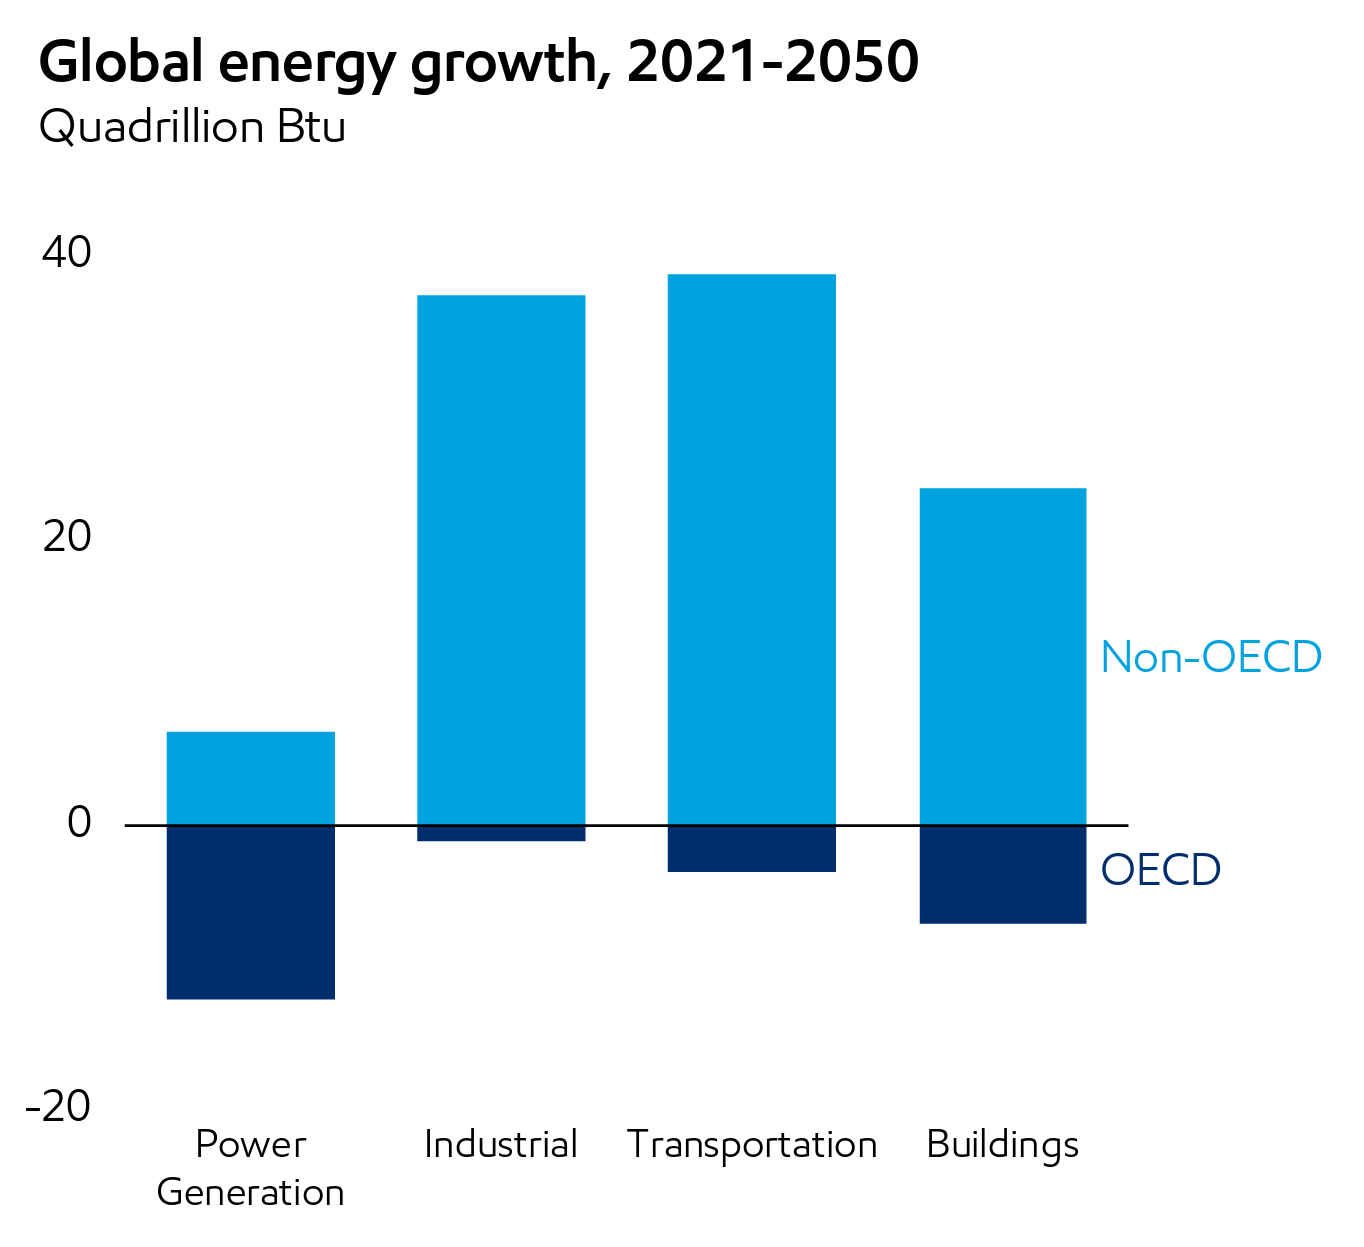 Global energy growth, 2021-2050 by sector, in Quadrillion Btu. Graphic: ExxonMobil